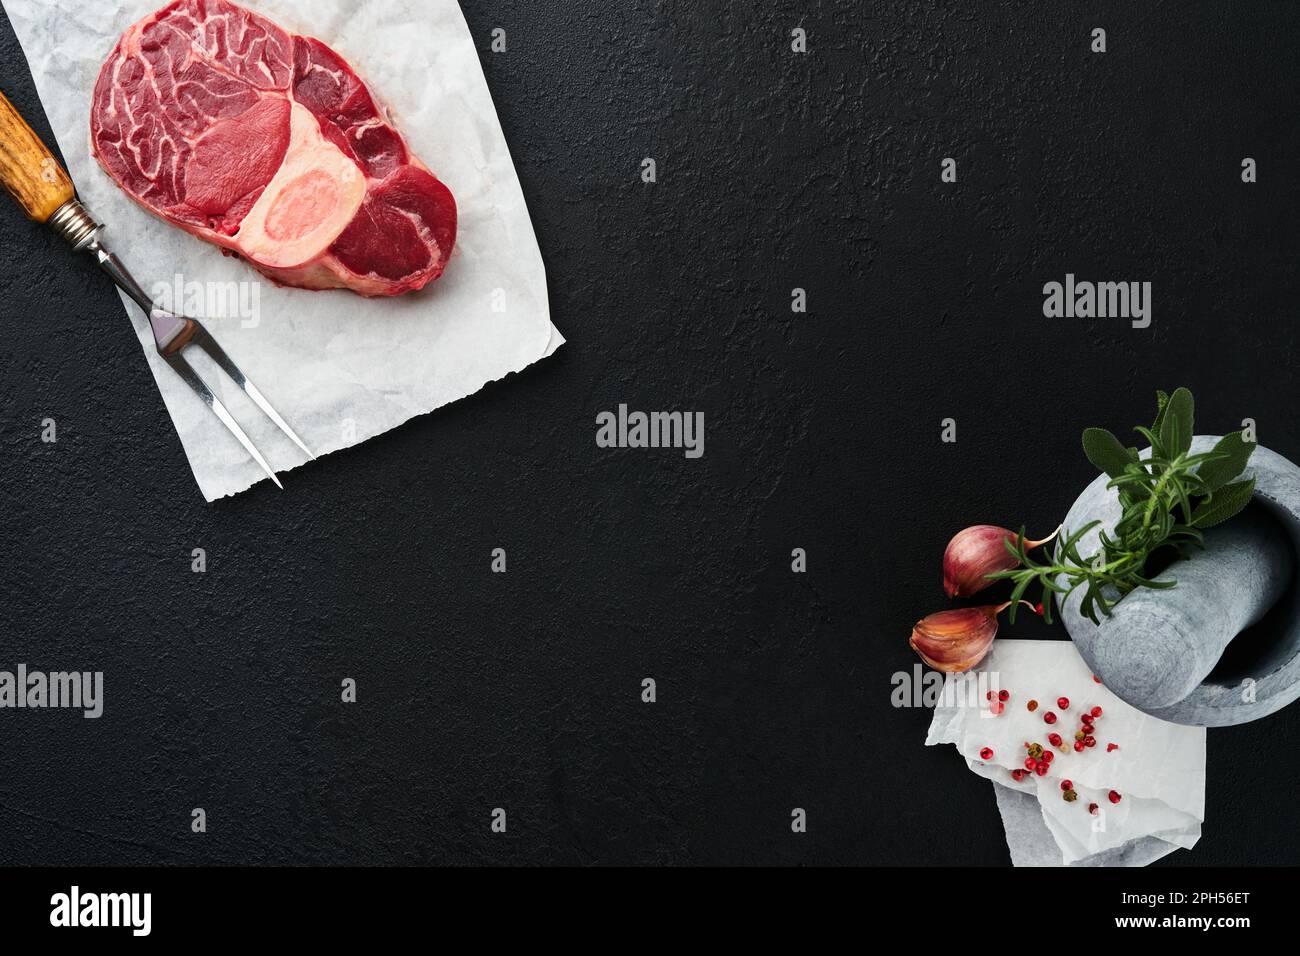 Osso Buco raw steak meat. Barbecue meat. Raw fresh cross cut veal shank and seasonings pepper, rosemary, thyme and salt on dark background. Beef Leg S Stock Photo